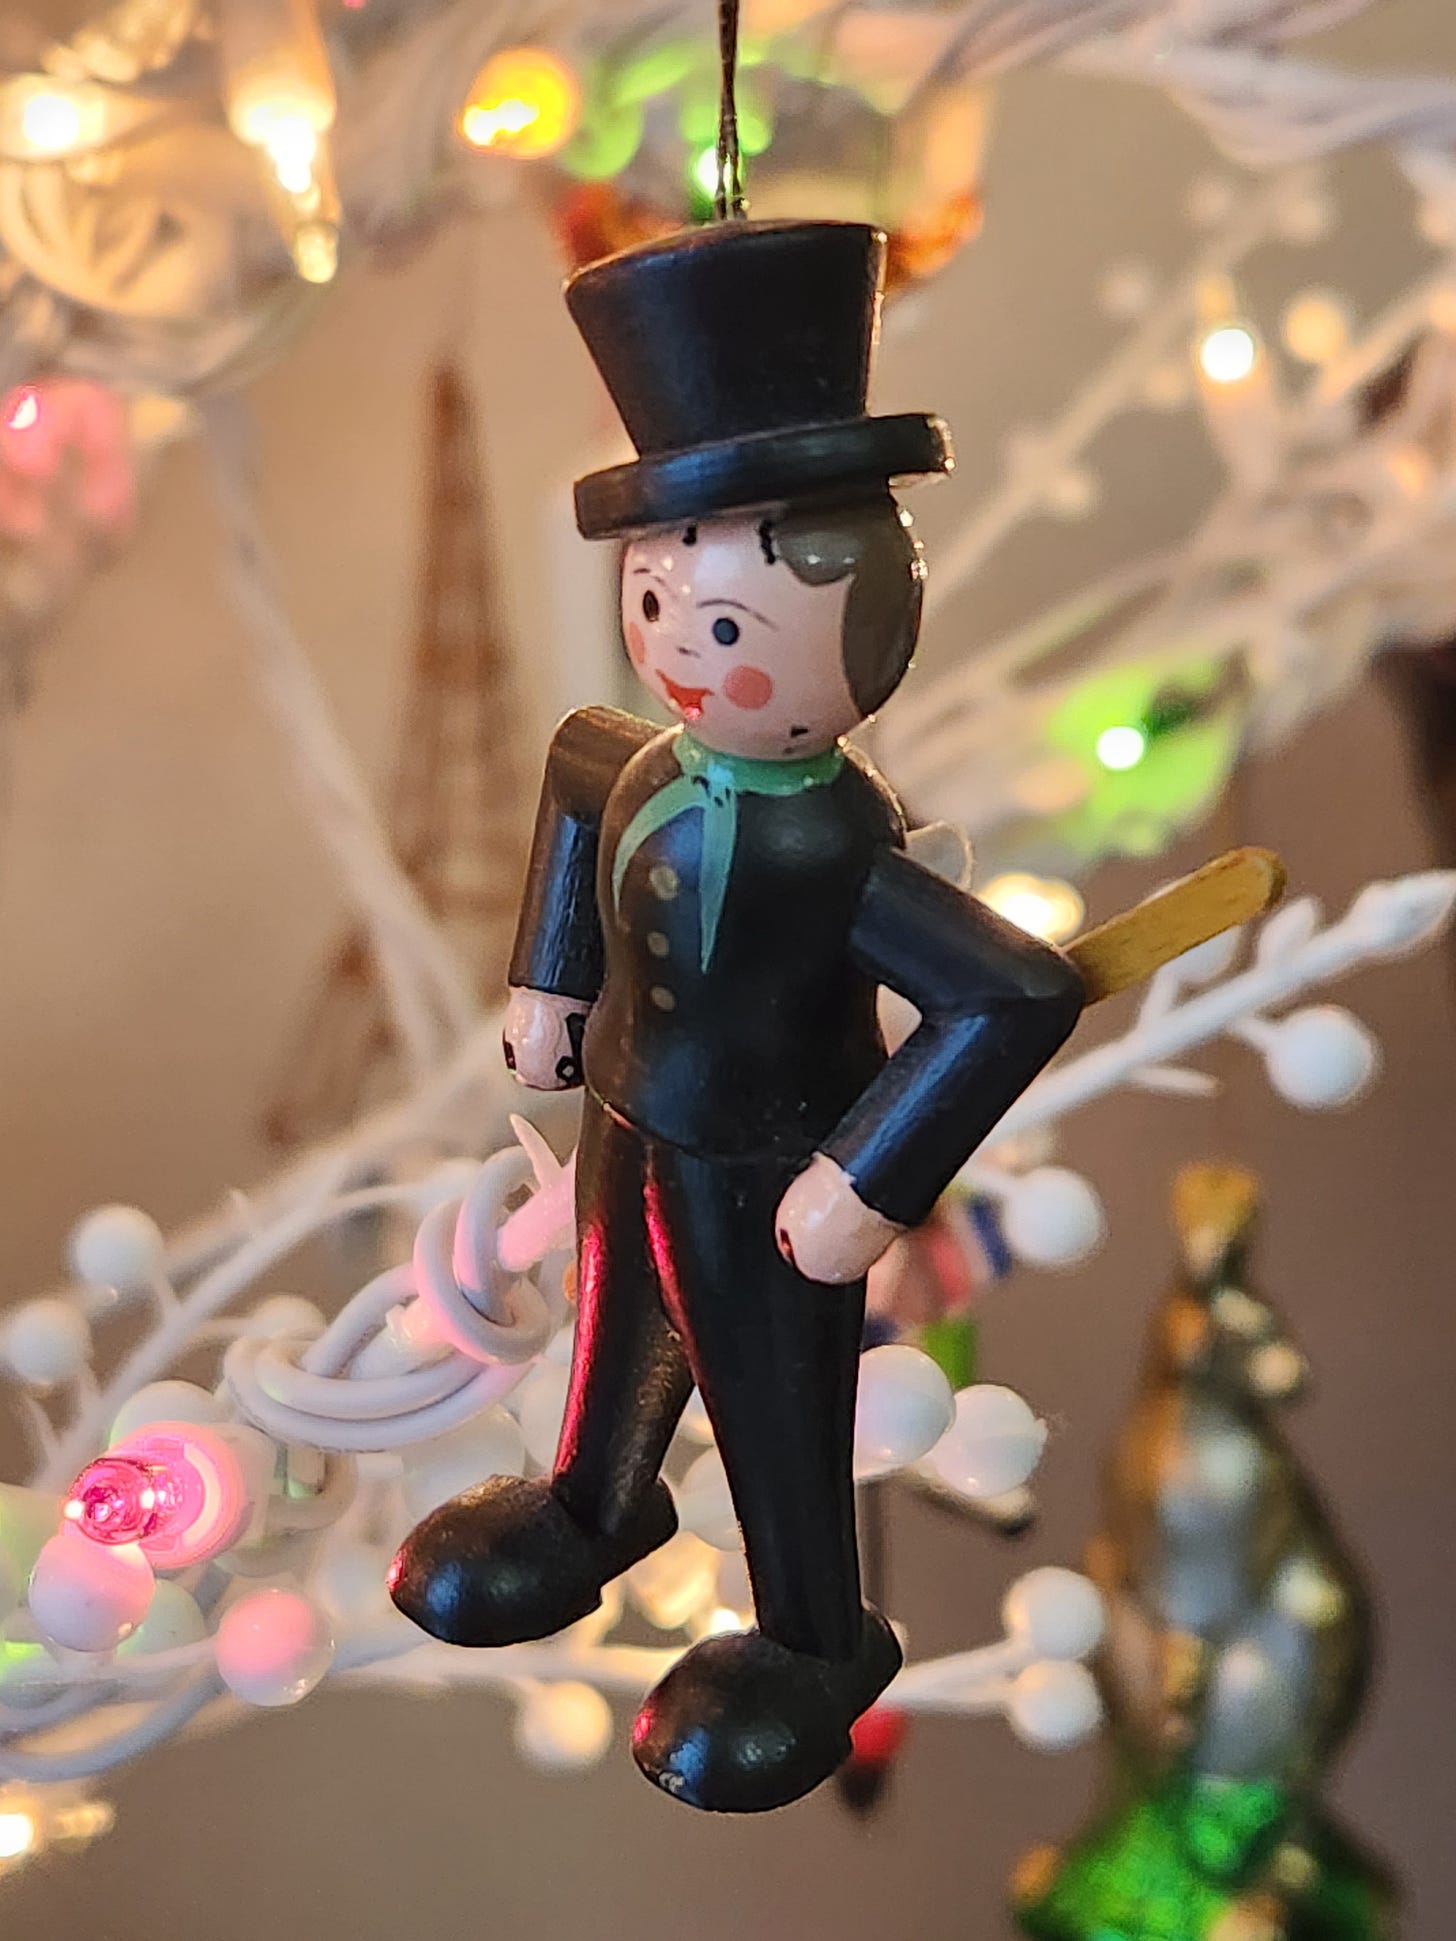 Wooden Christmas tree ornament of a Chimney Sweep.